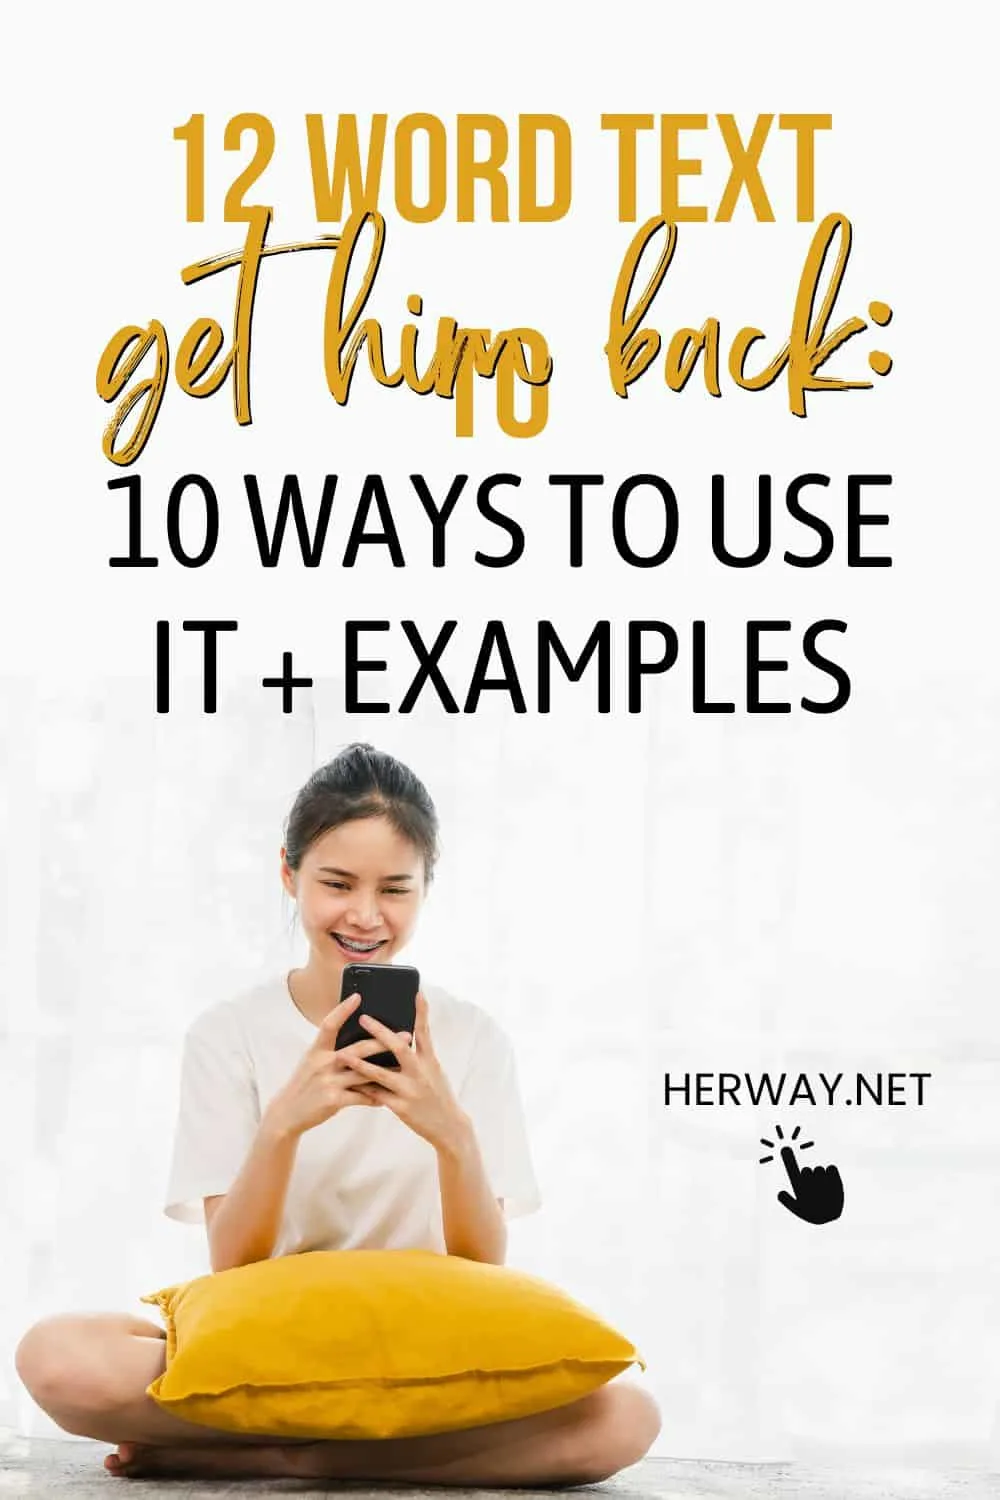 12 Word Text To Get Him Back 10 Ways To Use It + Examples Pinterest